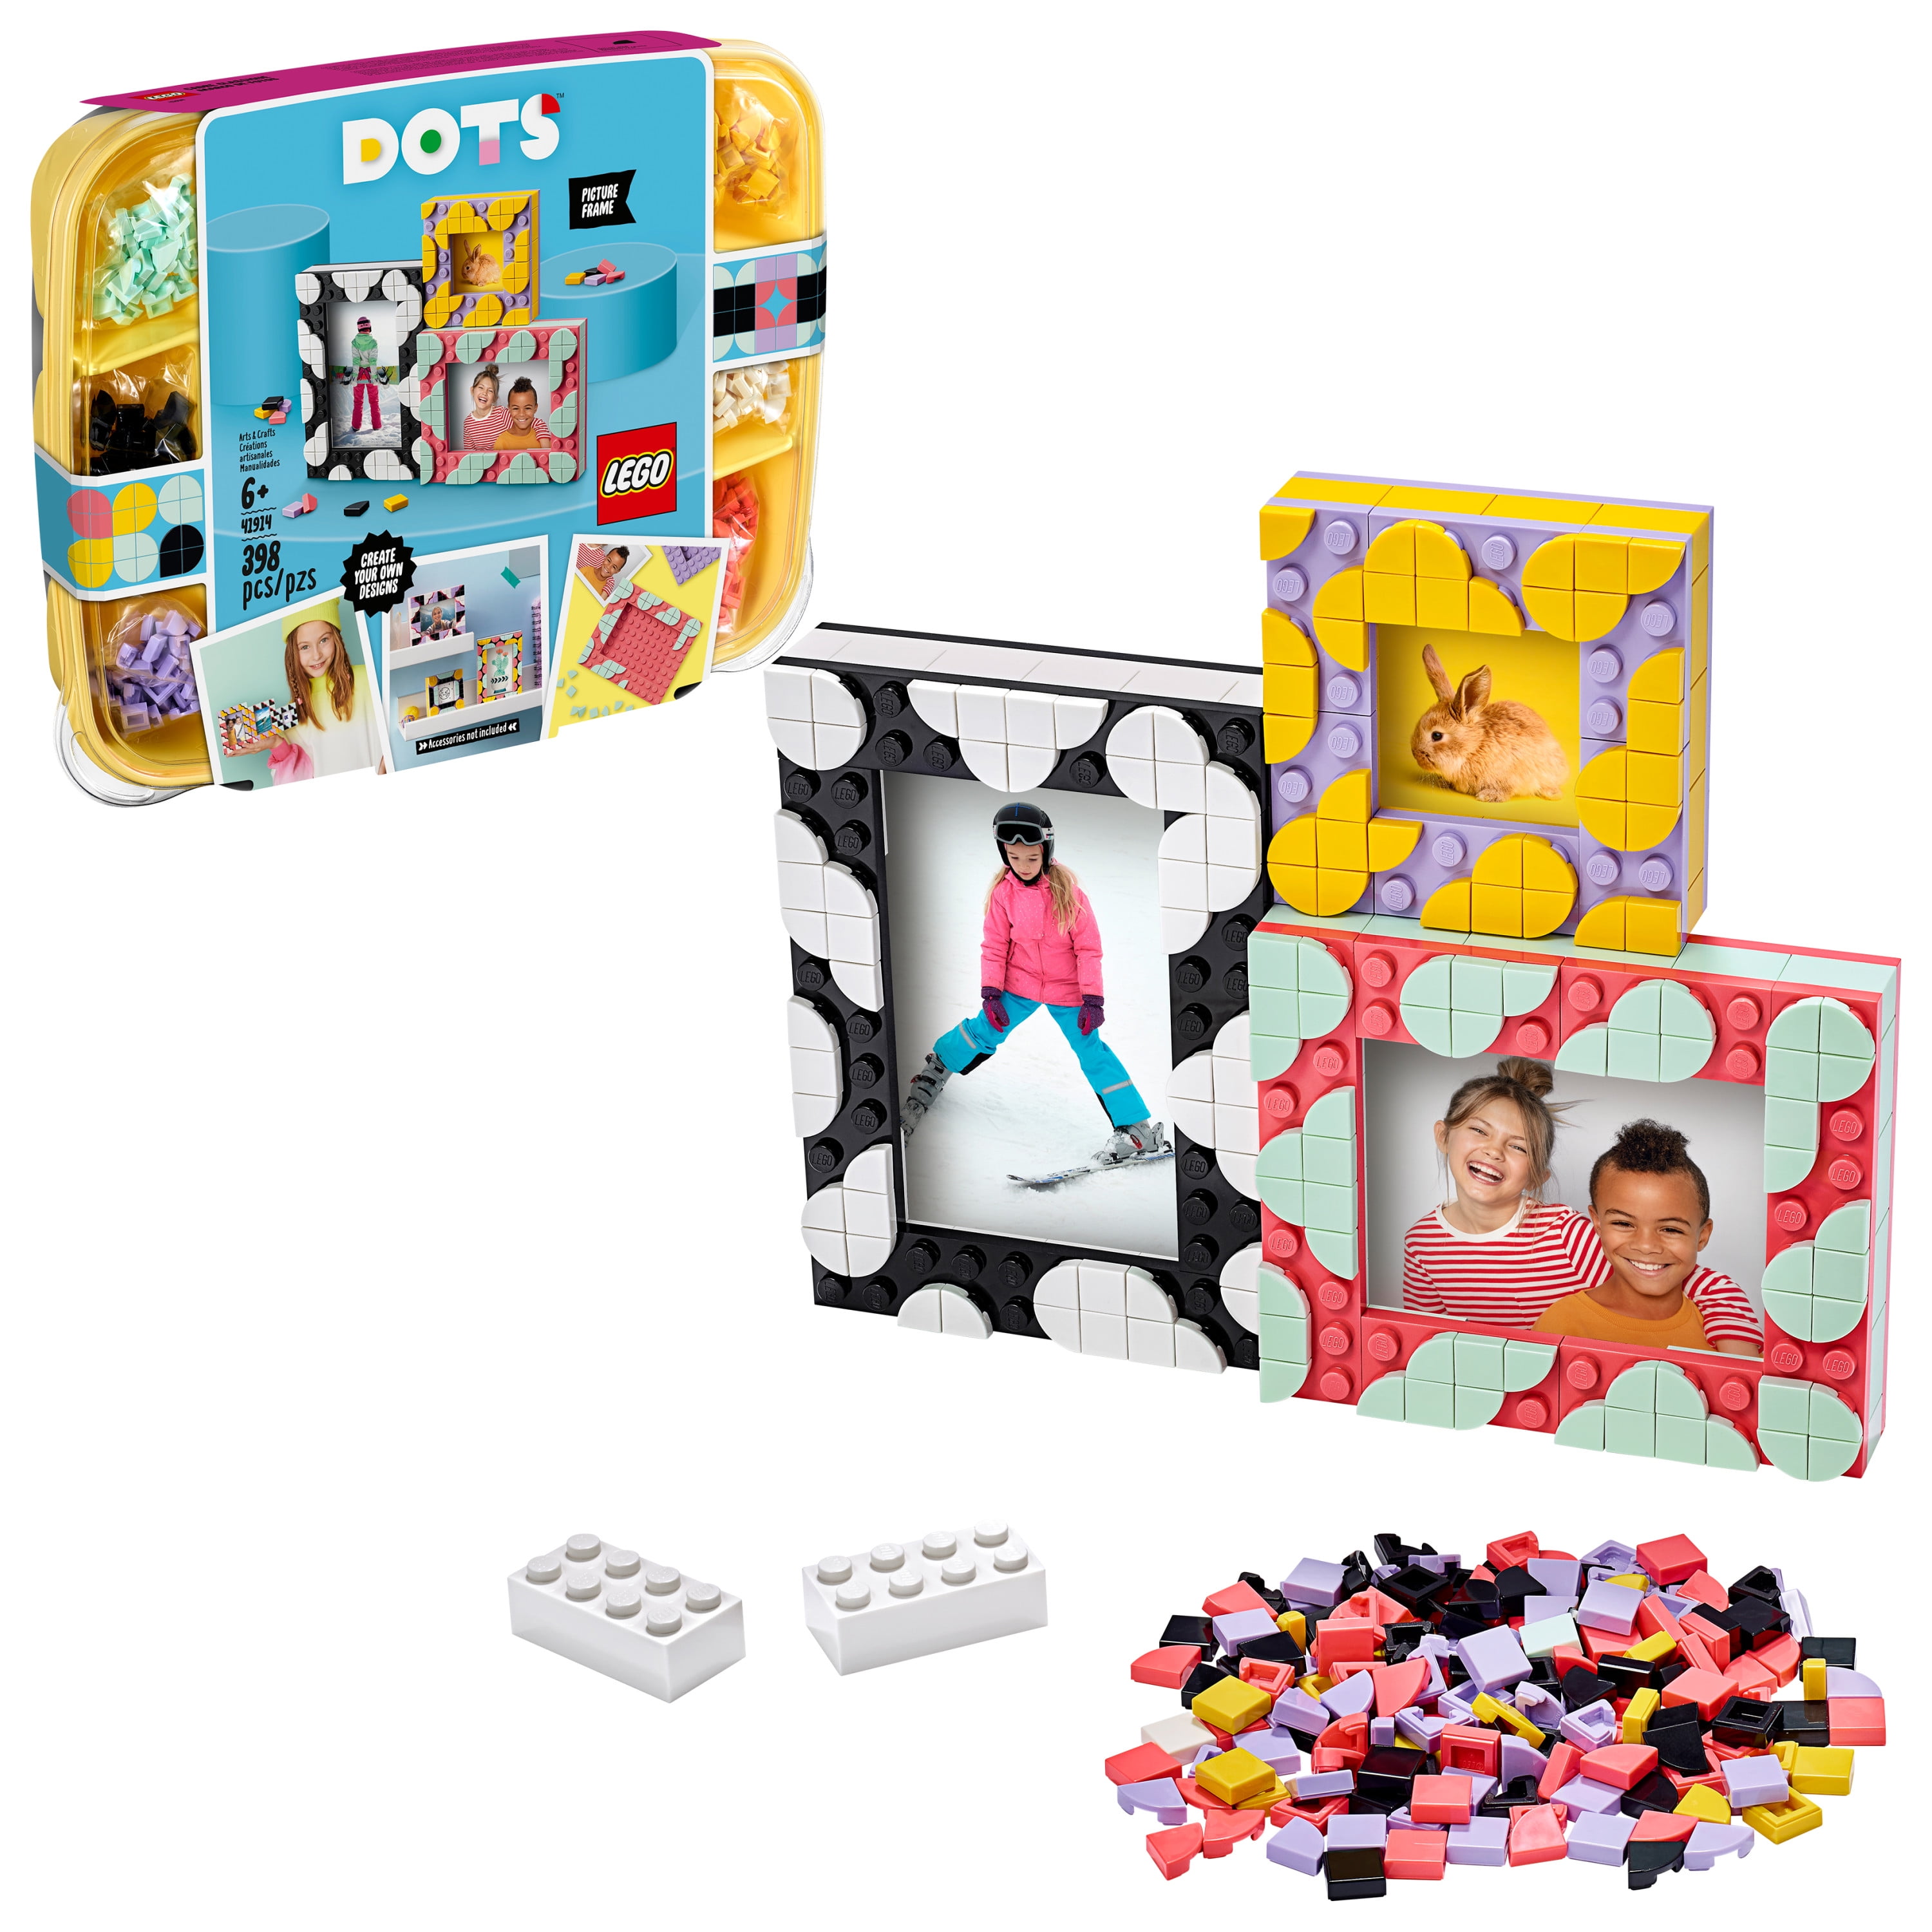 LEGO DOTS Desk Organizer 41907 DIY Craft Decorations Kit for Kids who Like Designing and Redesigning Their Own Room Decor Items to Use New 2020 405 Pieces Makes a Fun and Inspirational Gift